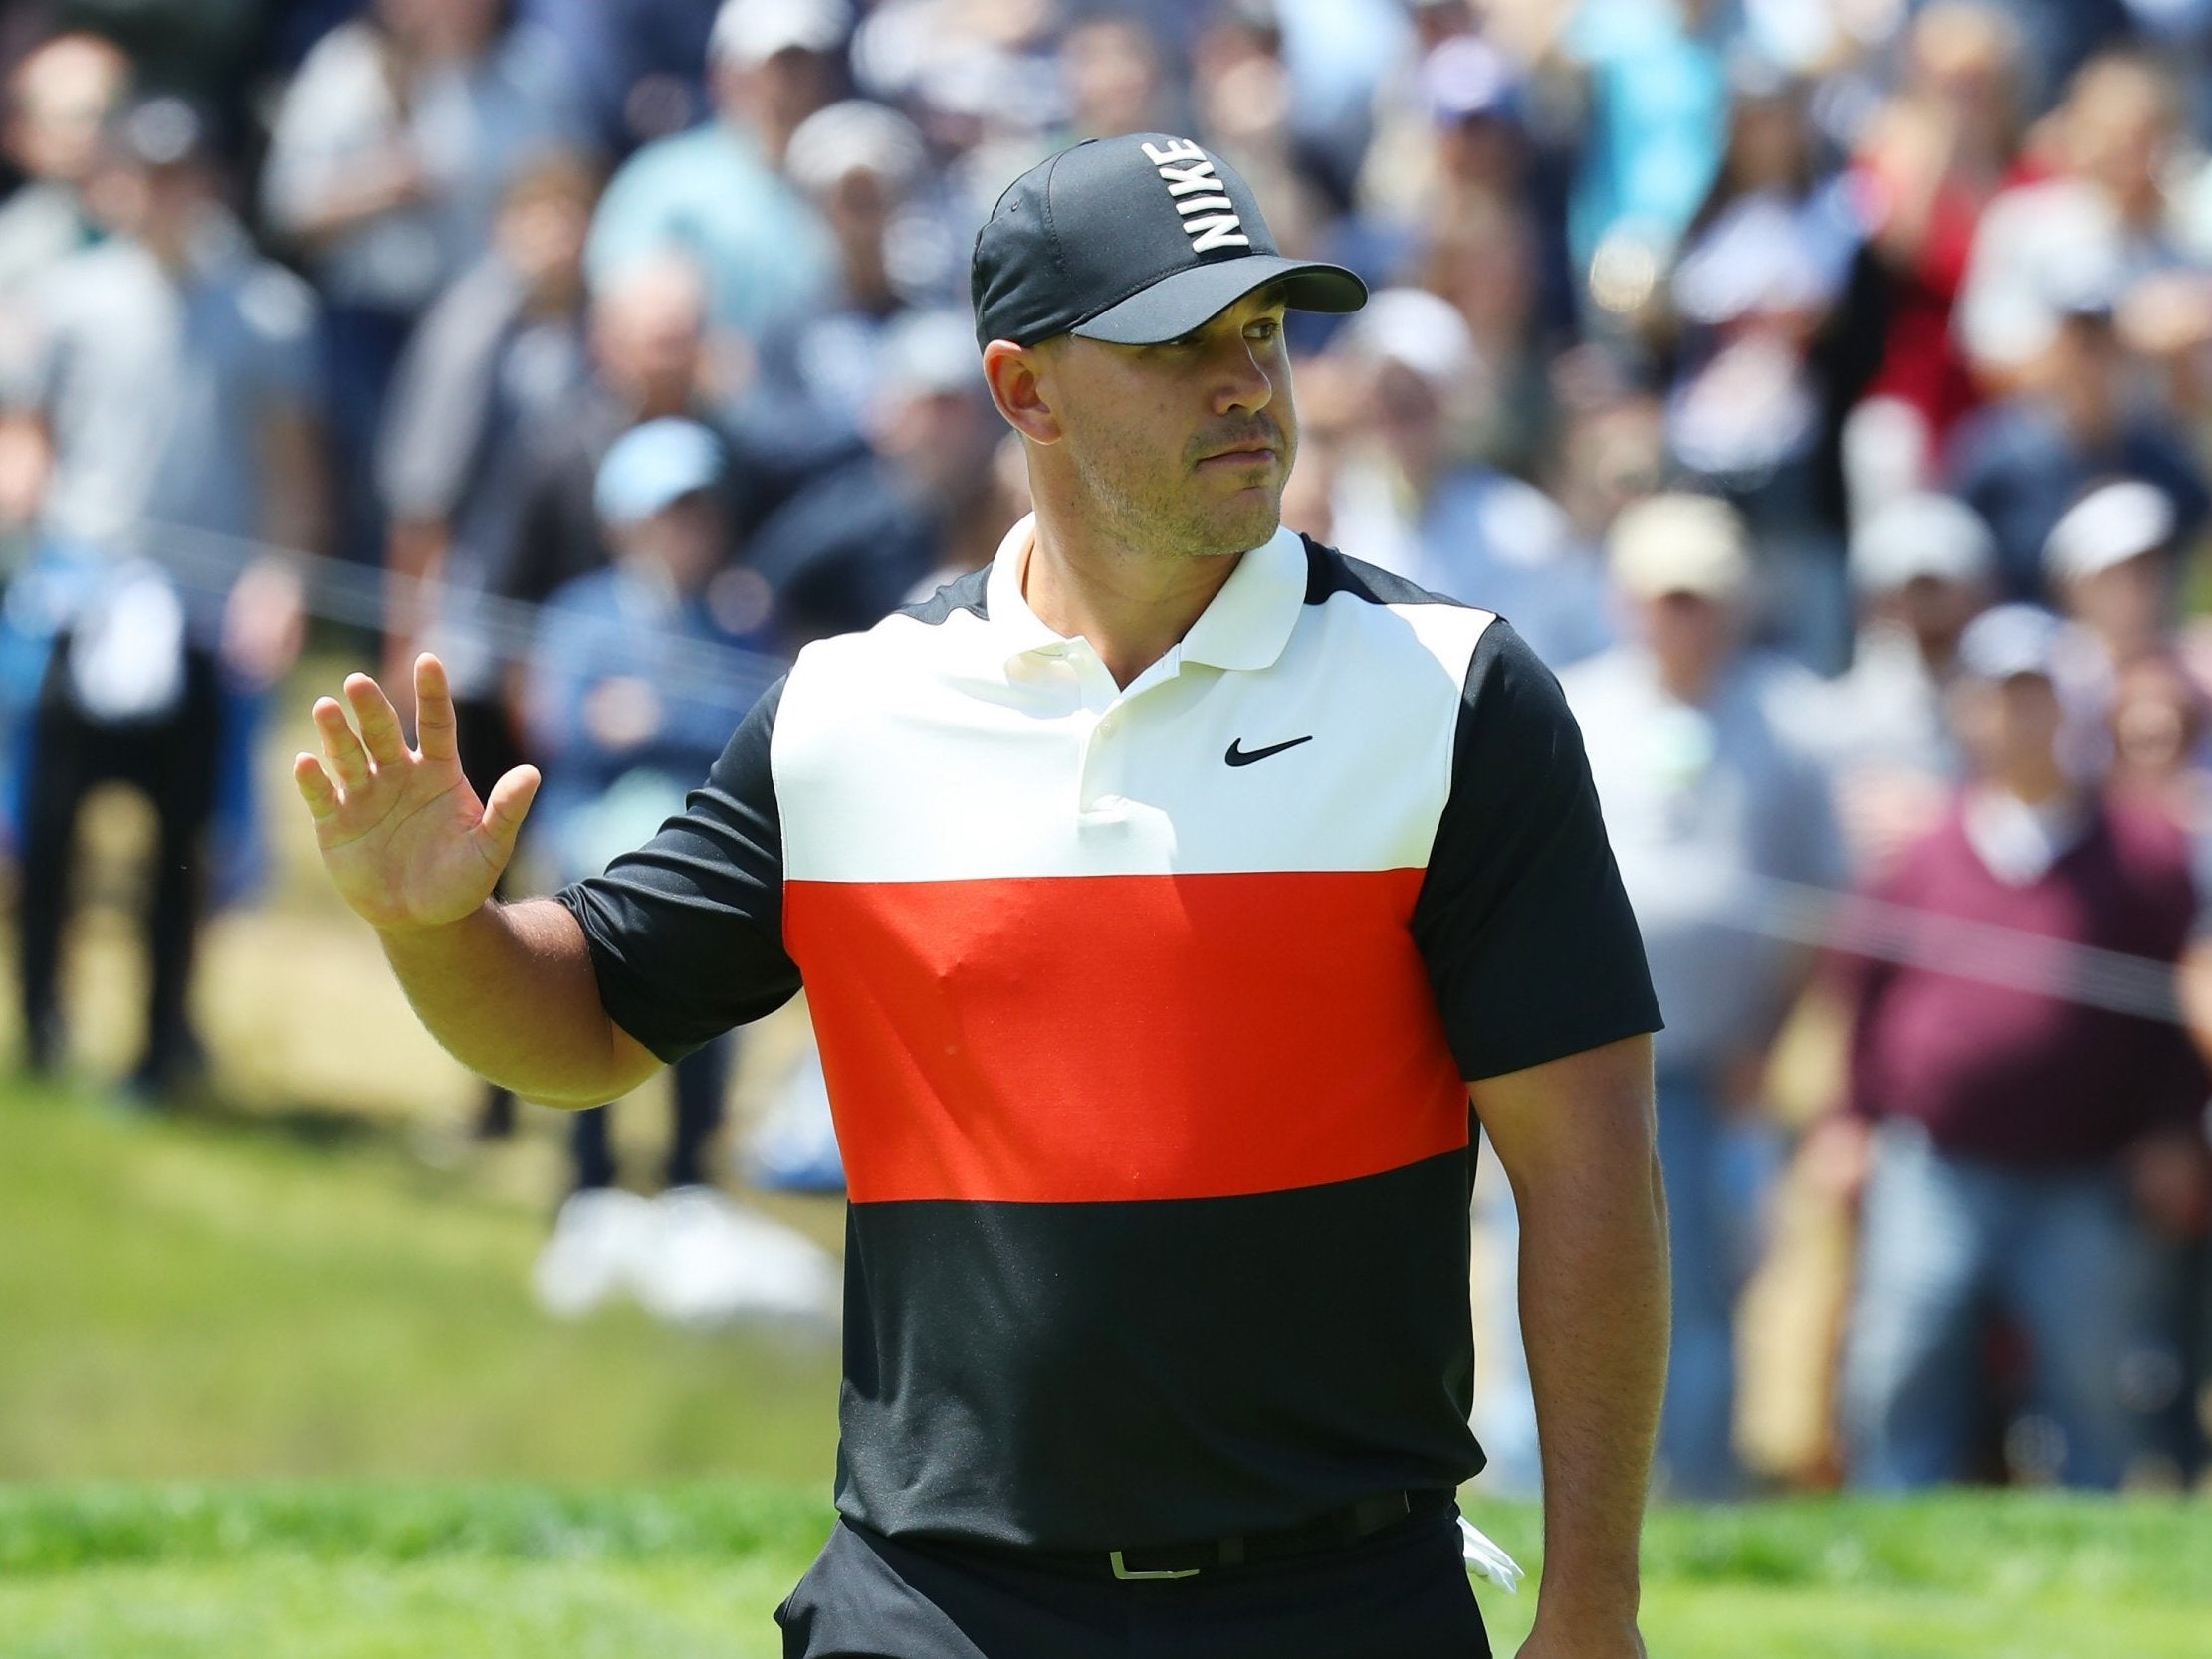 Koepka took the lead with a formidable seven-under-par 63